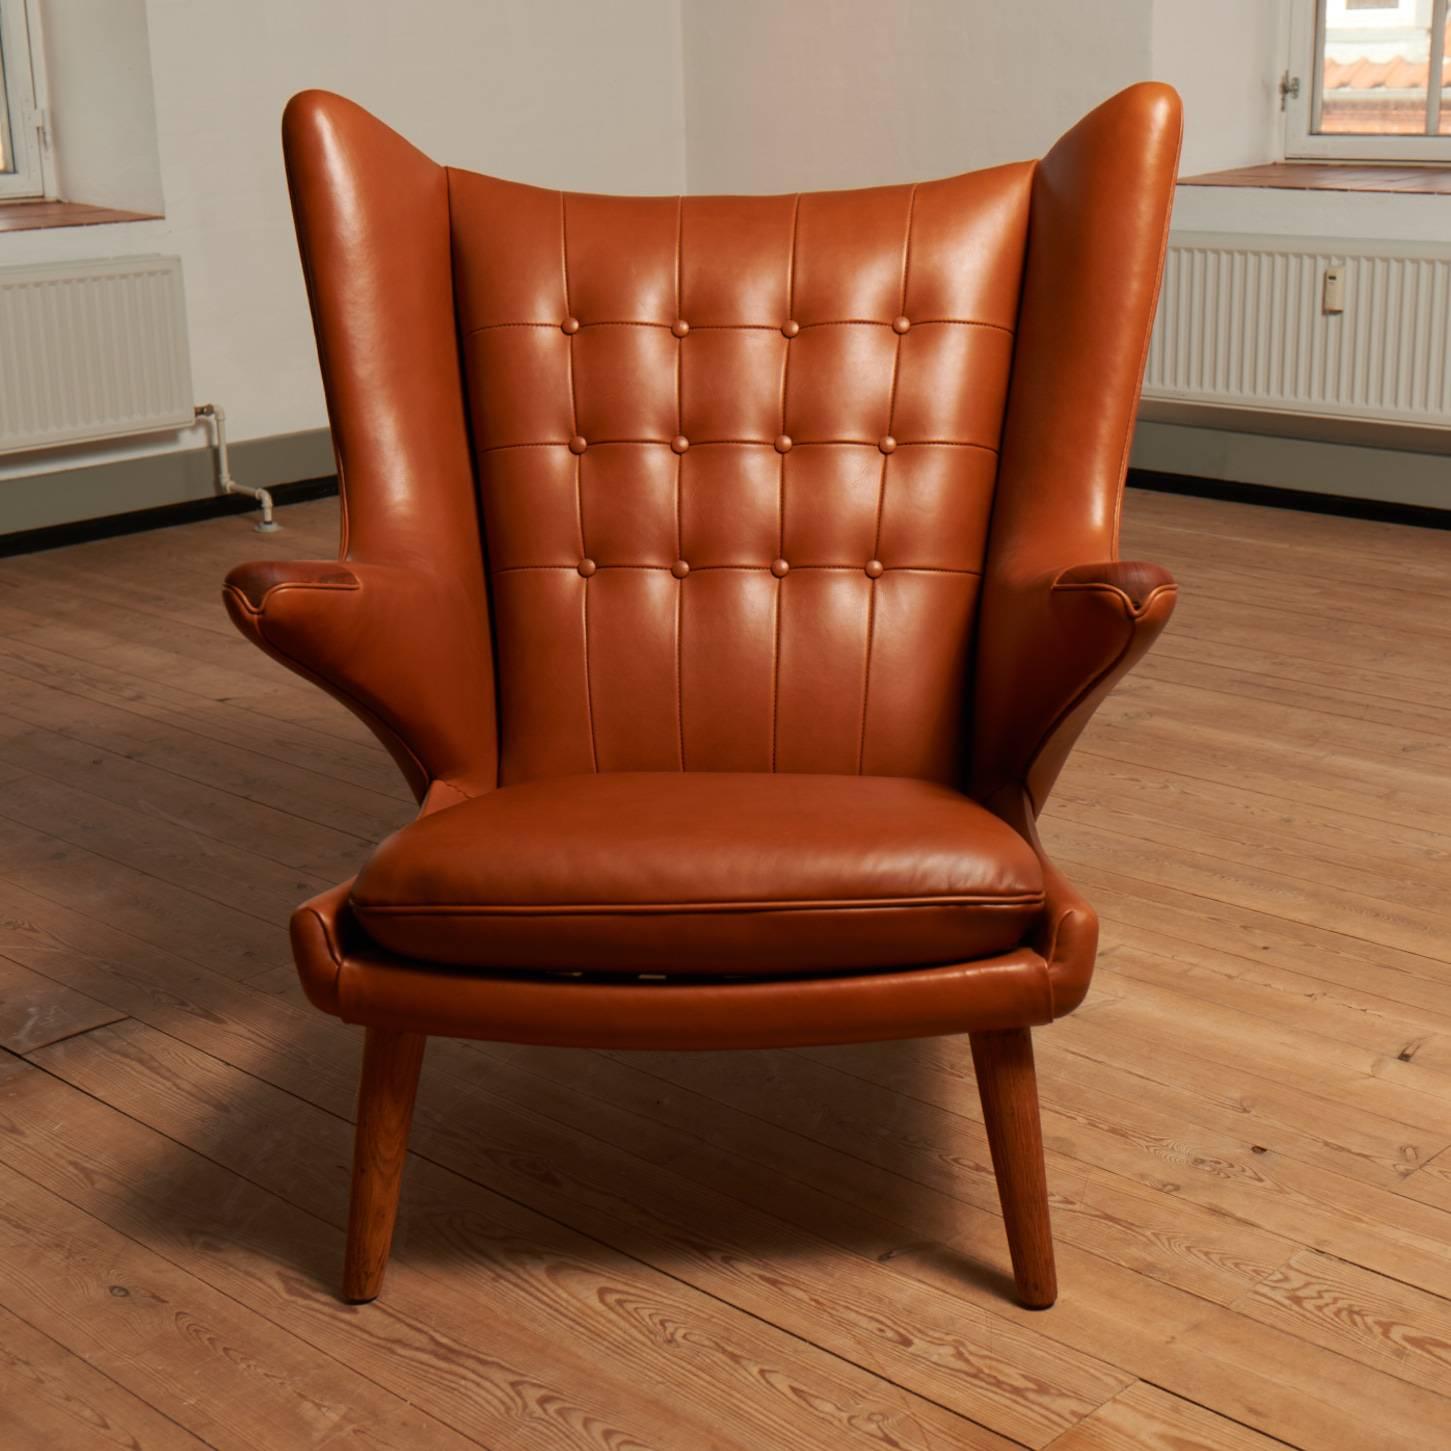 Hans J. Wegner AP19 Papa Bear chair newly upholstered in walnut elegance leather.
Legs and nails are in teak.